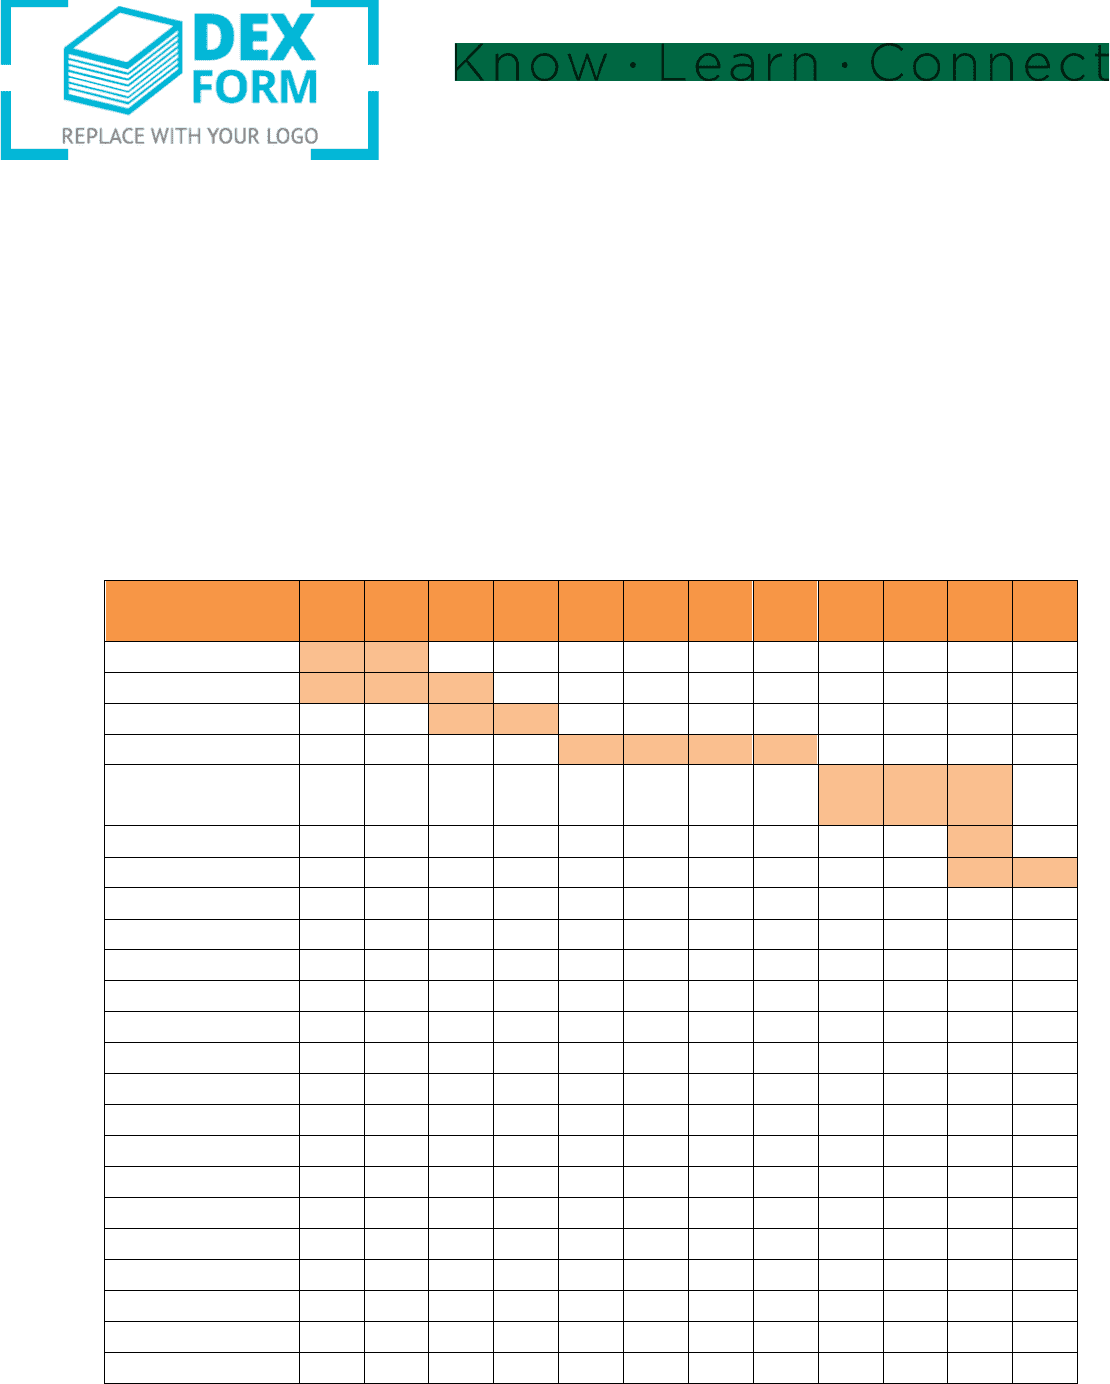 gantt-chart-template-in-word-and-pdf-formats